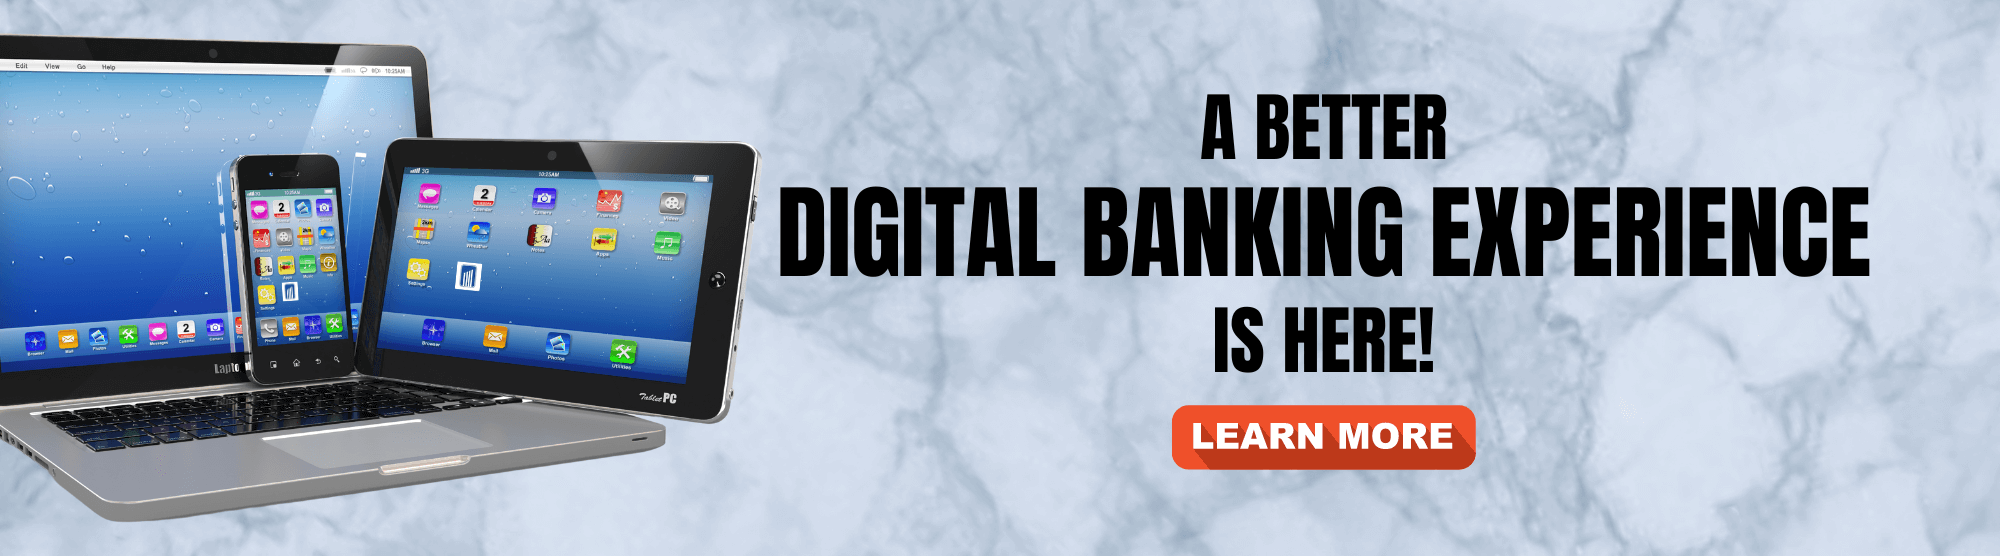 A BETTER DIGITIAL BANKING EXPERIENCE IS HERE!